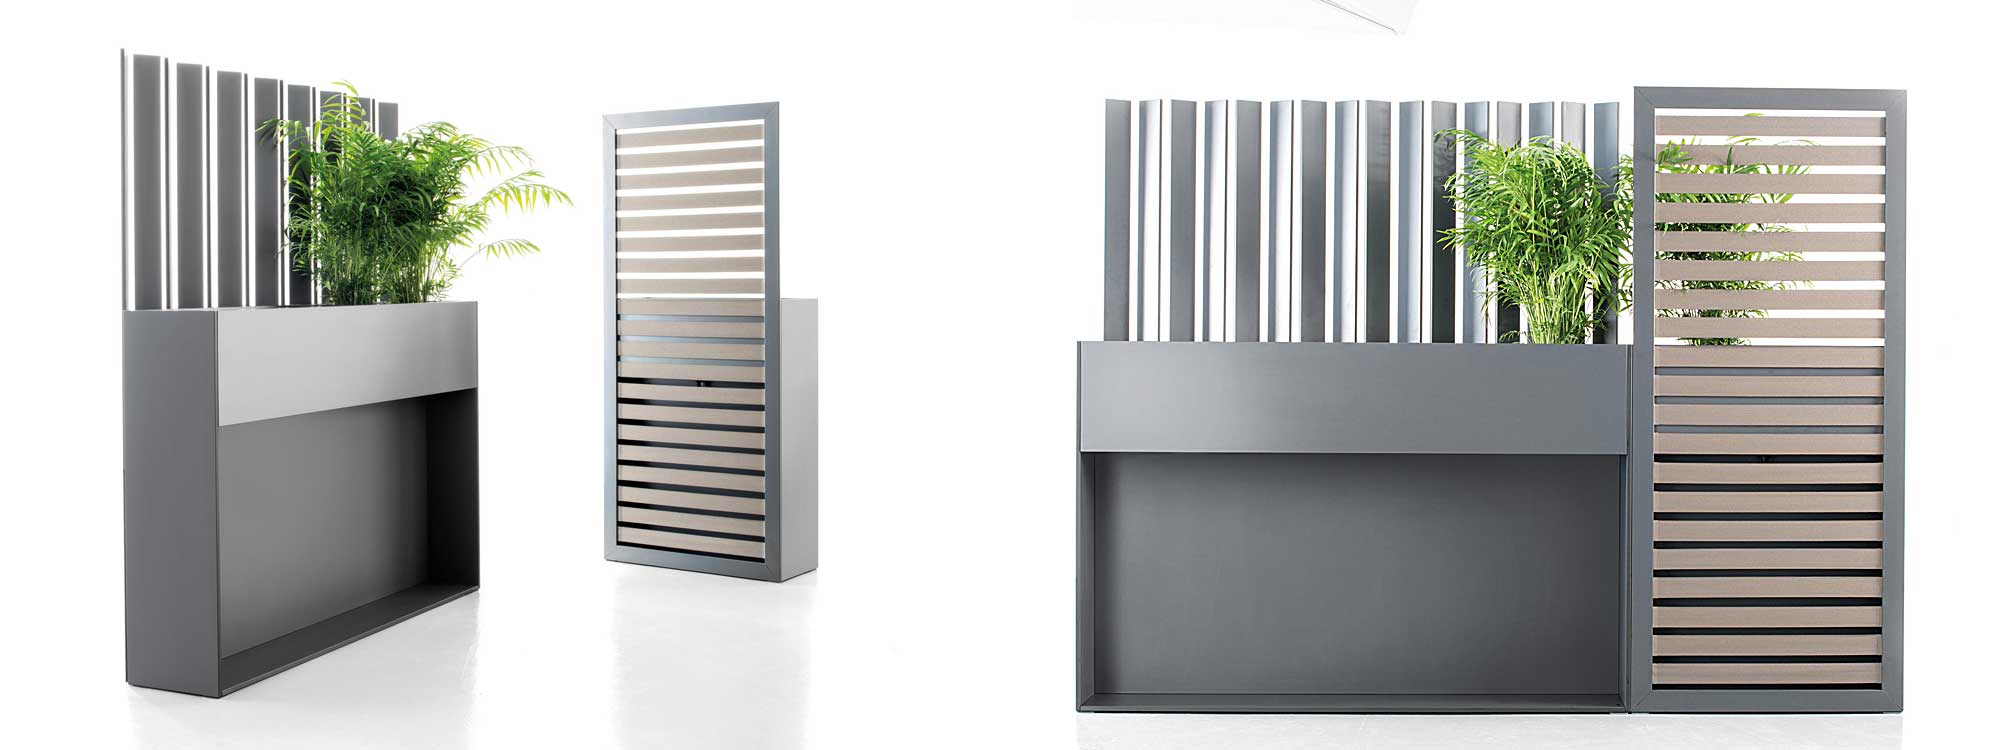 Studio image of different sizes of Ticino minimalist raised planters and trellis in anthracite HPL by Conmoto